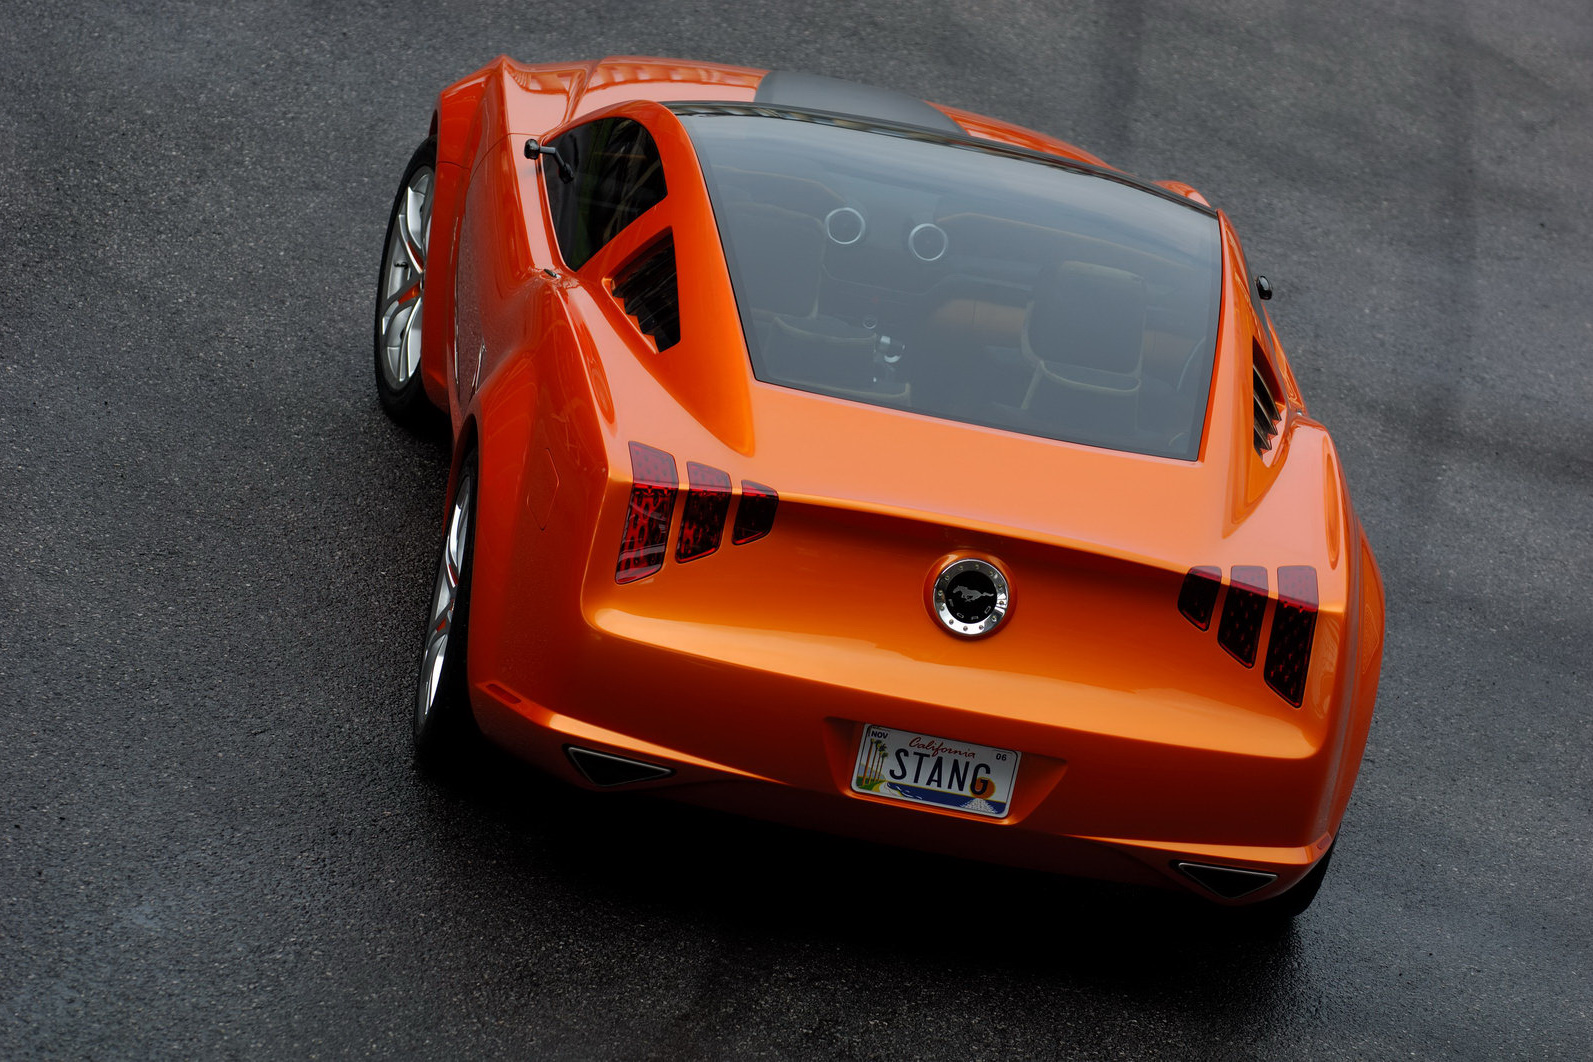 2006 Ford Mustang Concept by Giugiaro